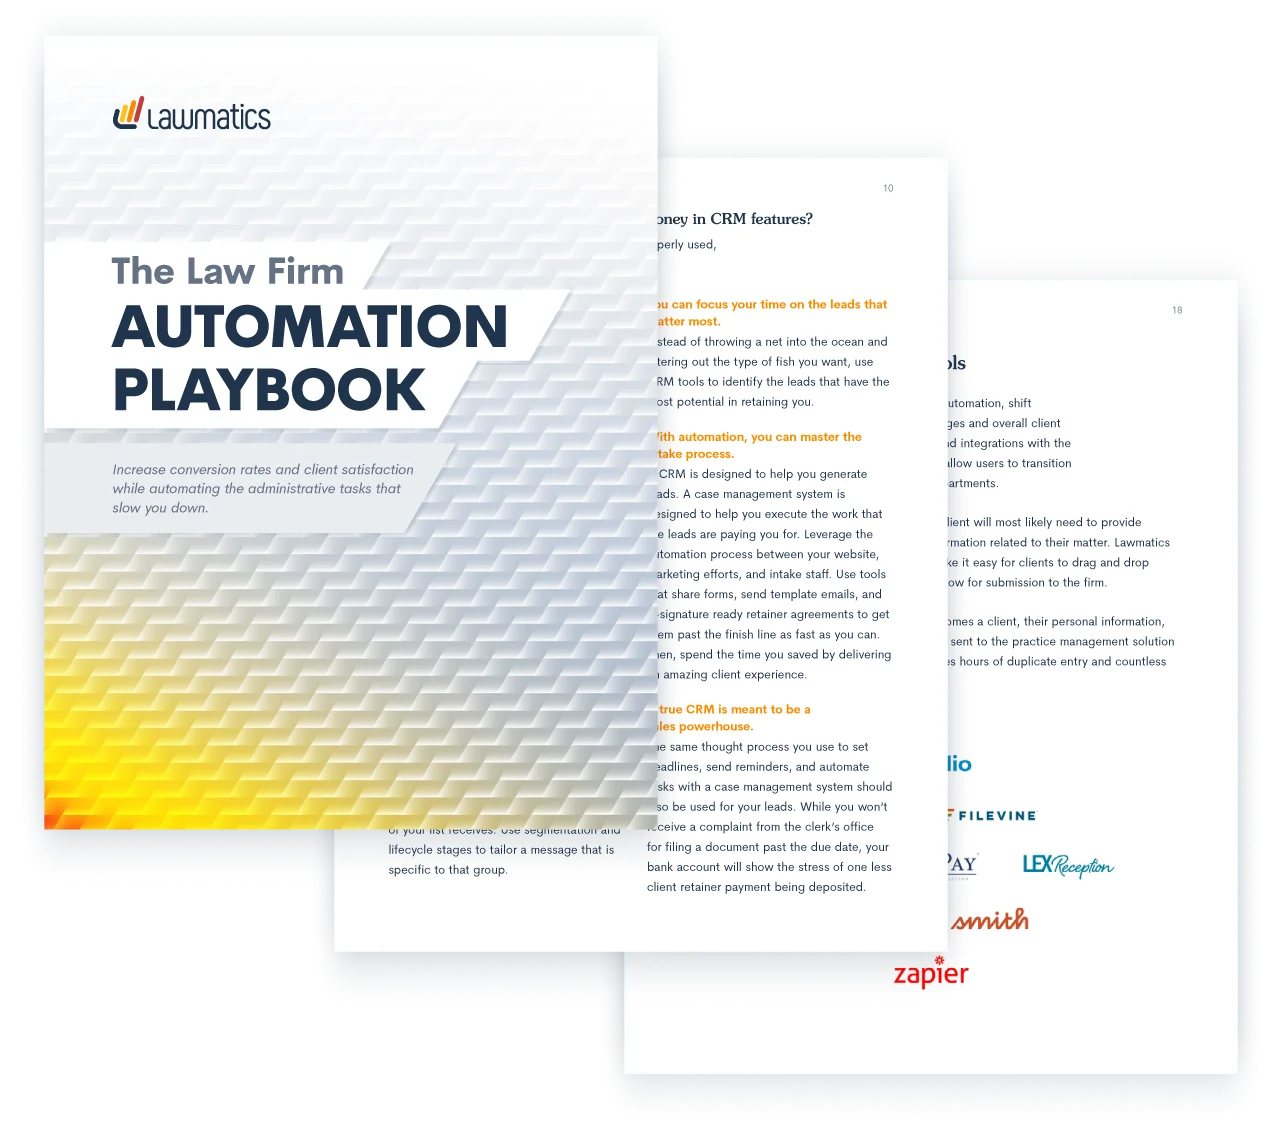 The Law Firm Automation Playbook